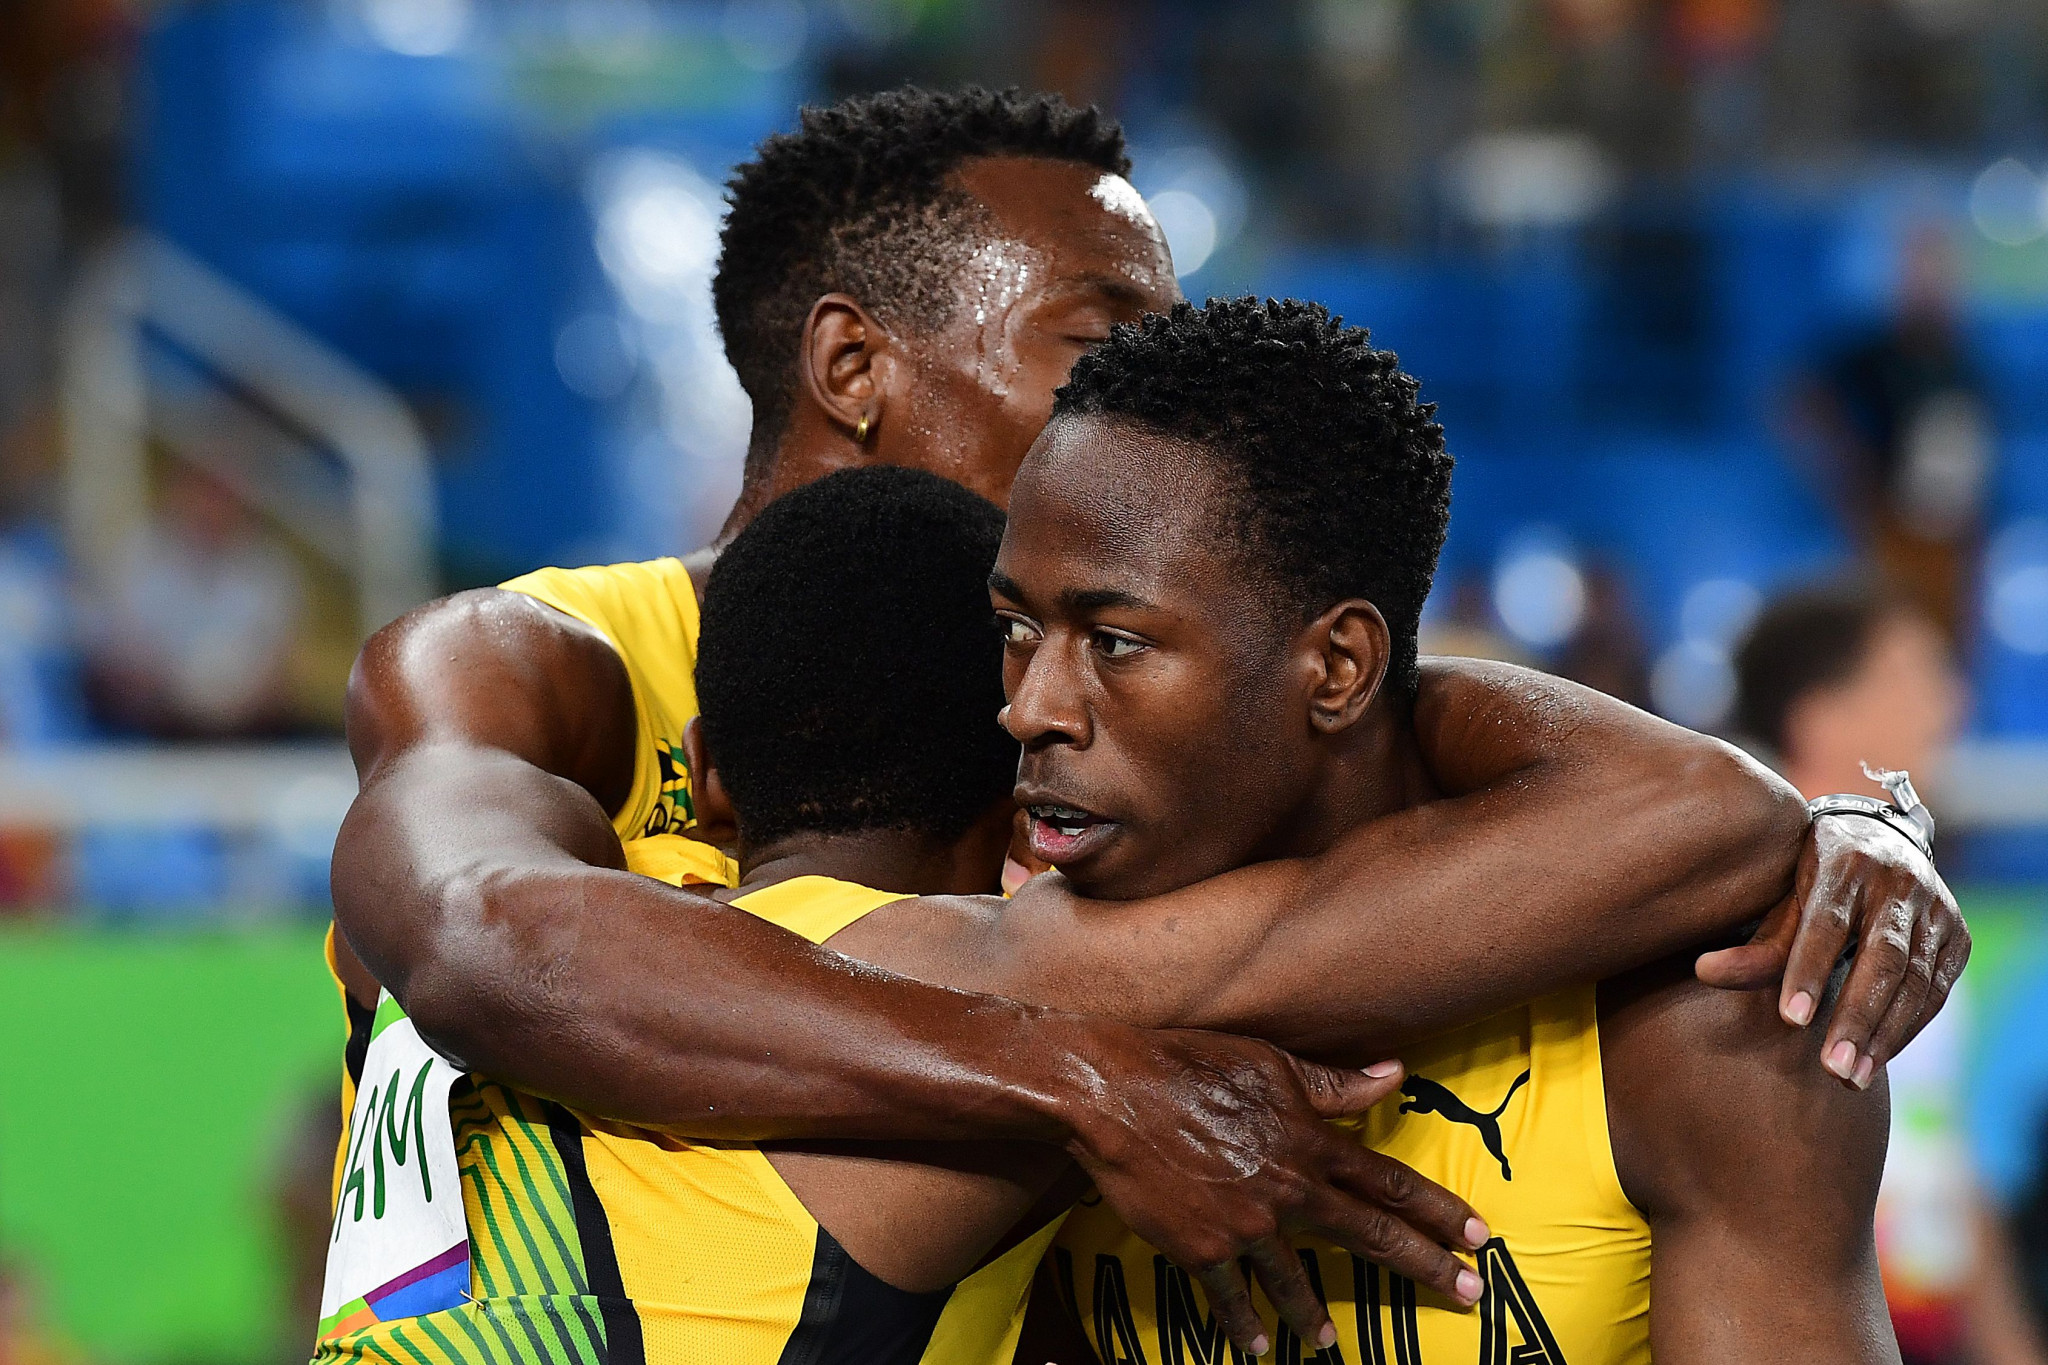 Jamaica will hope to continue a fine tradition in sprinting at Tokyo 2020  ©Getty Images